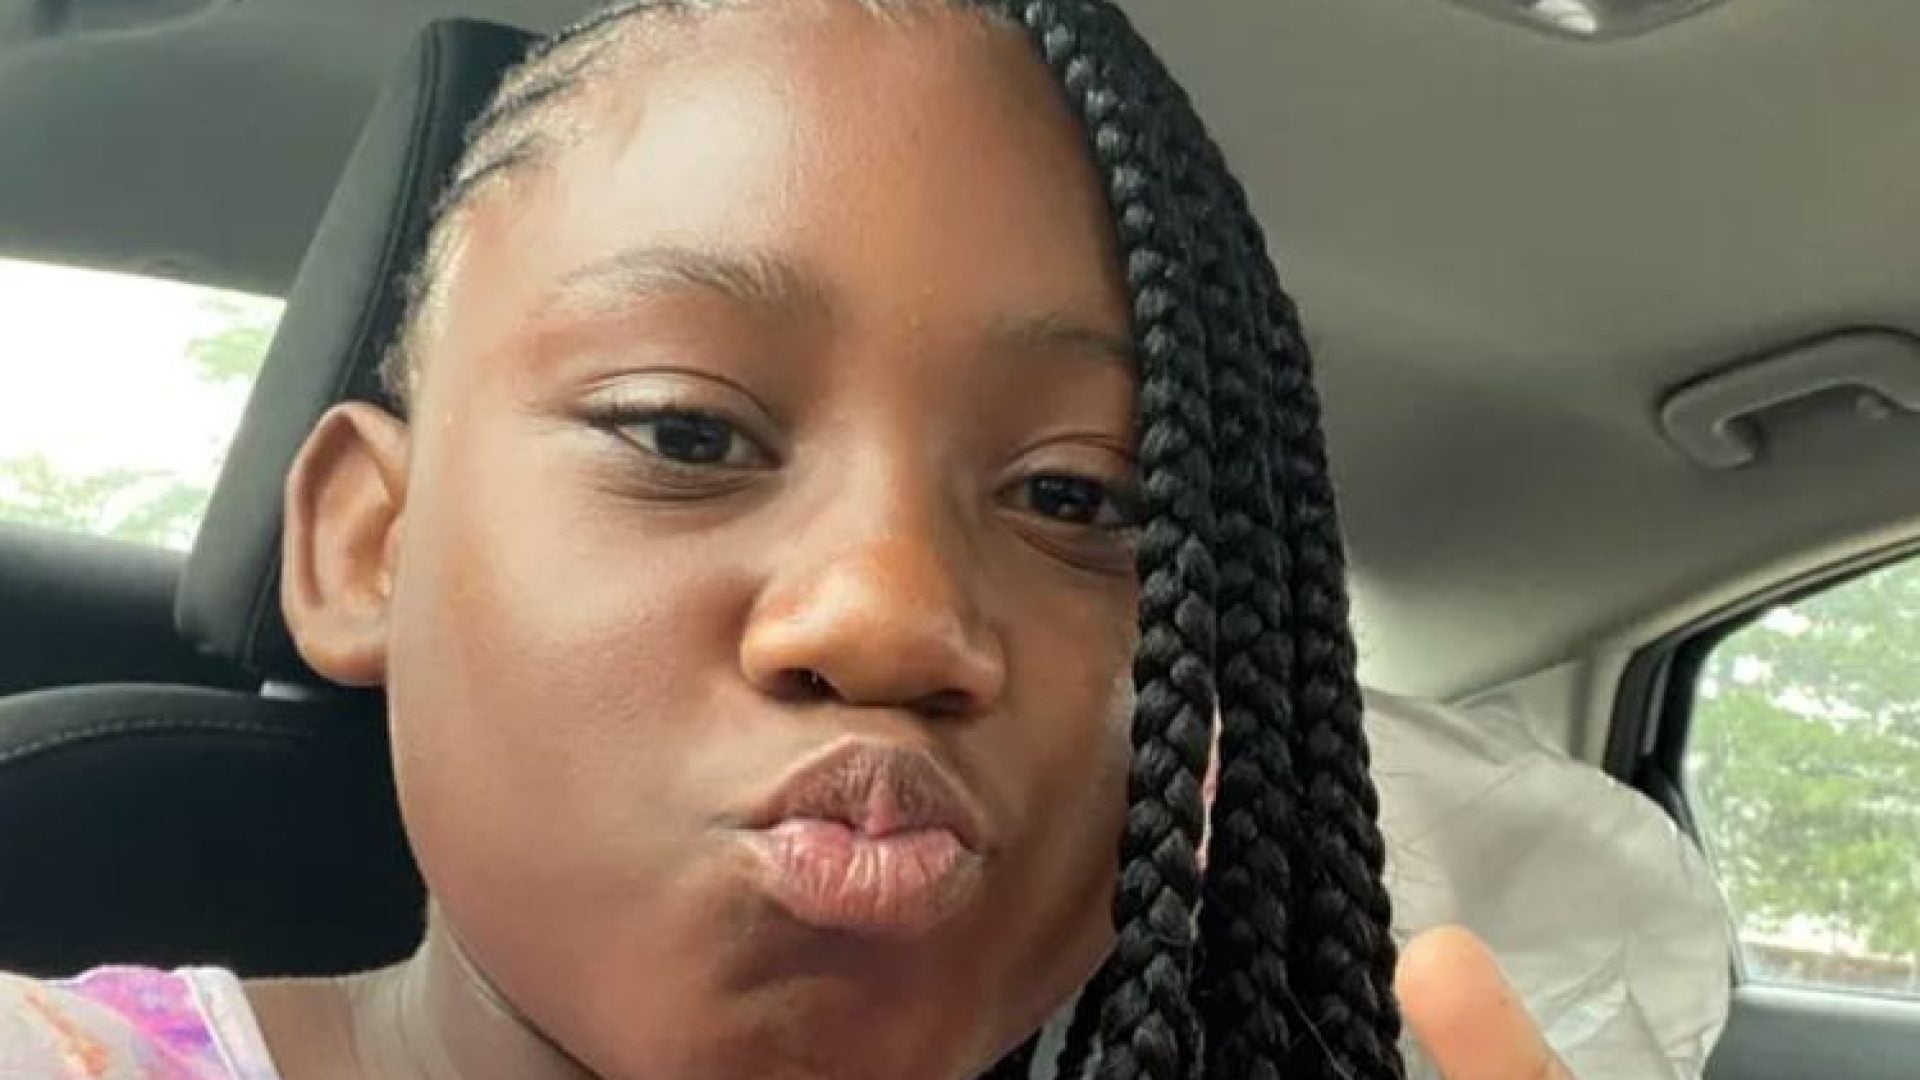 11-Year-Old Detroit Girl Killed In Drive-By Shooting While Sleeping